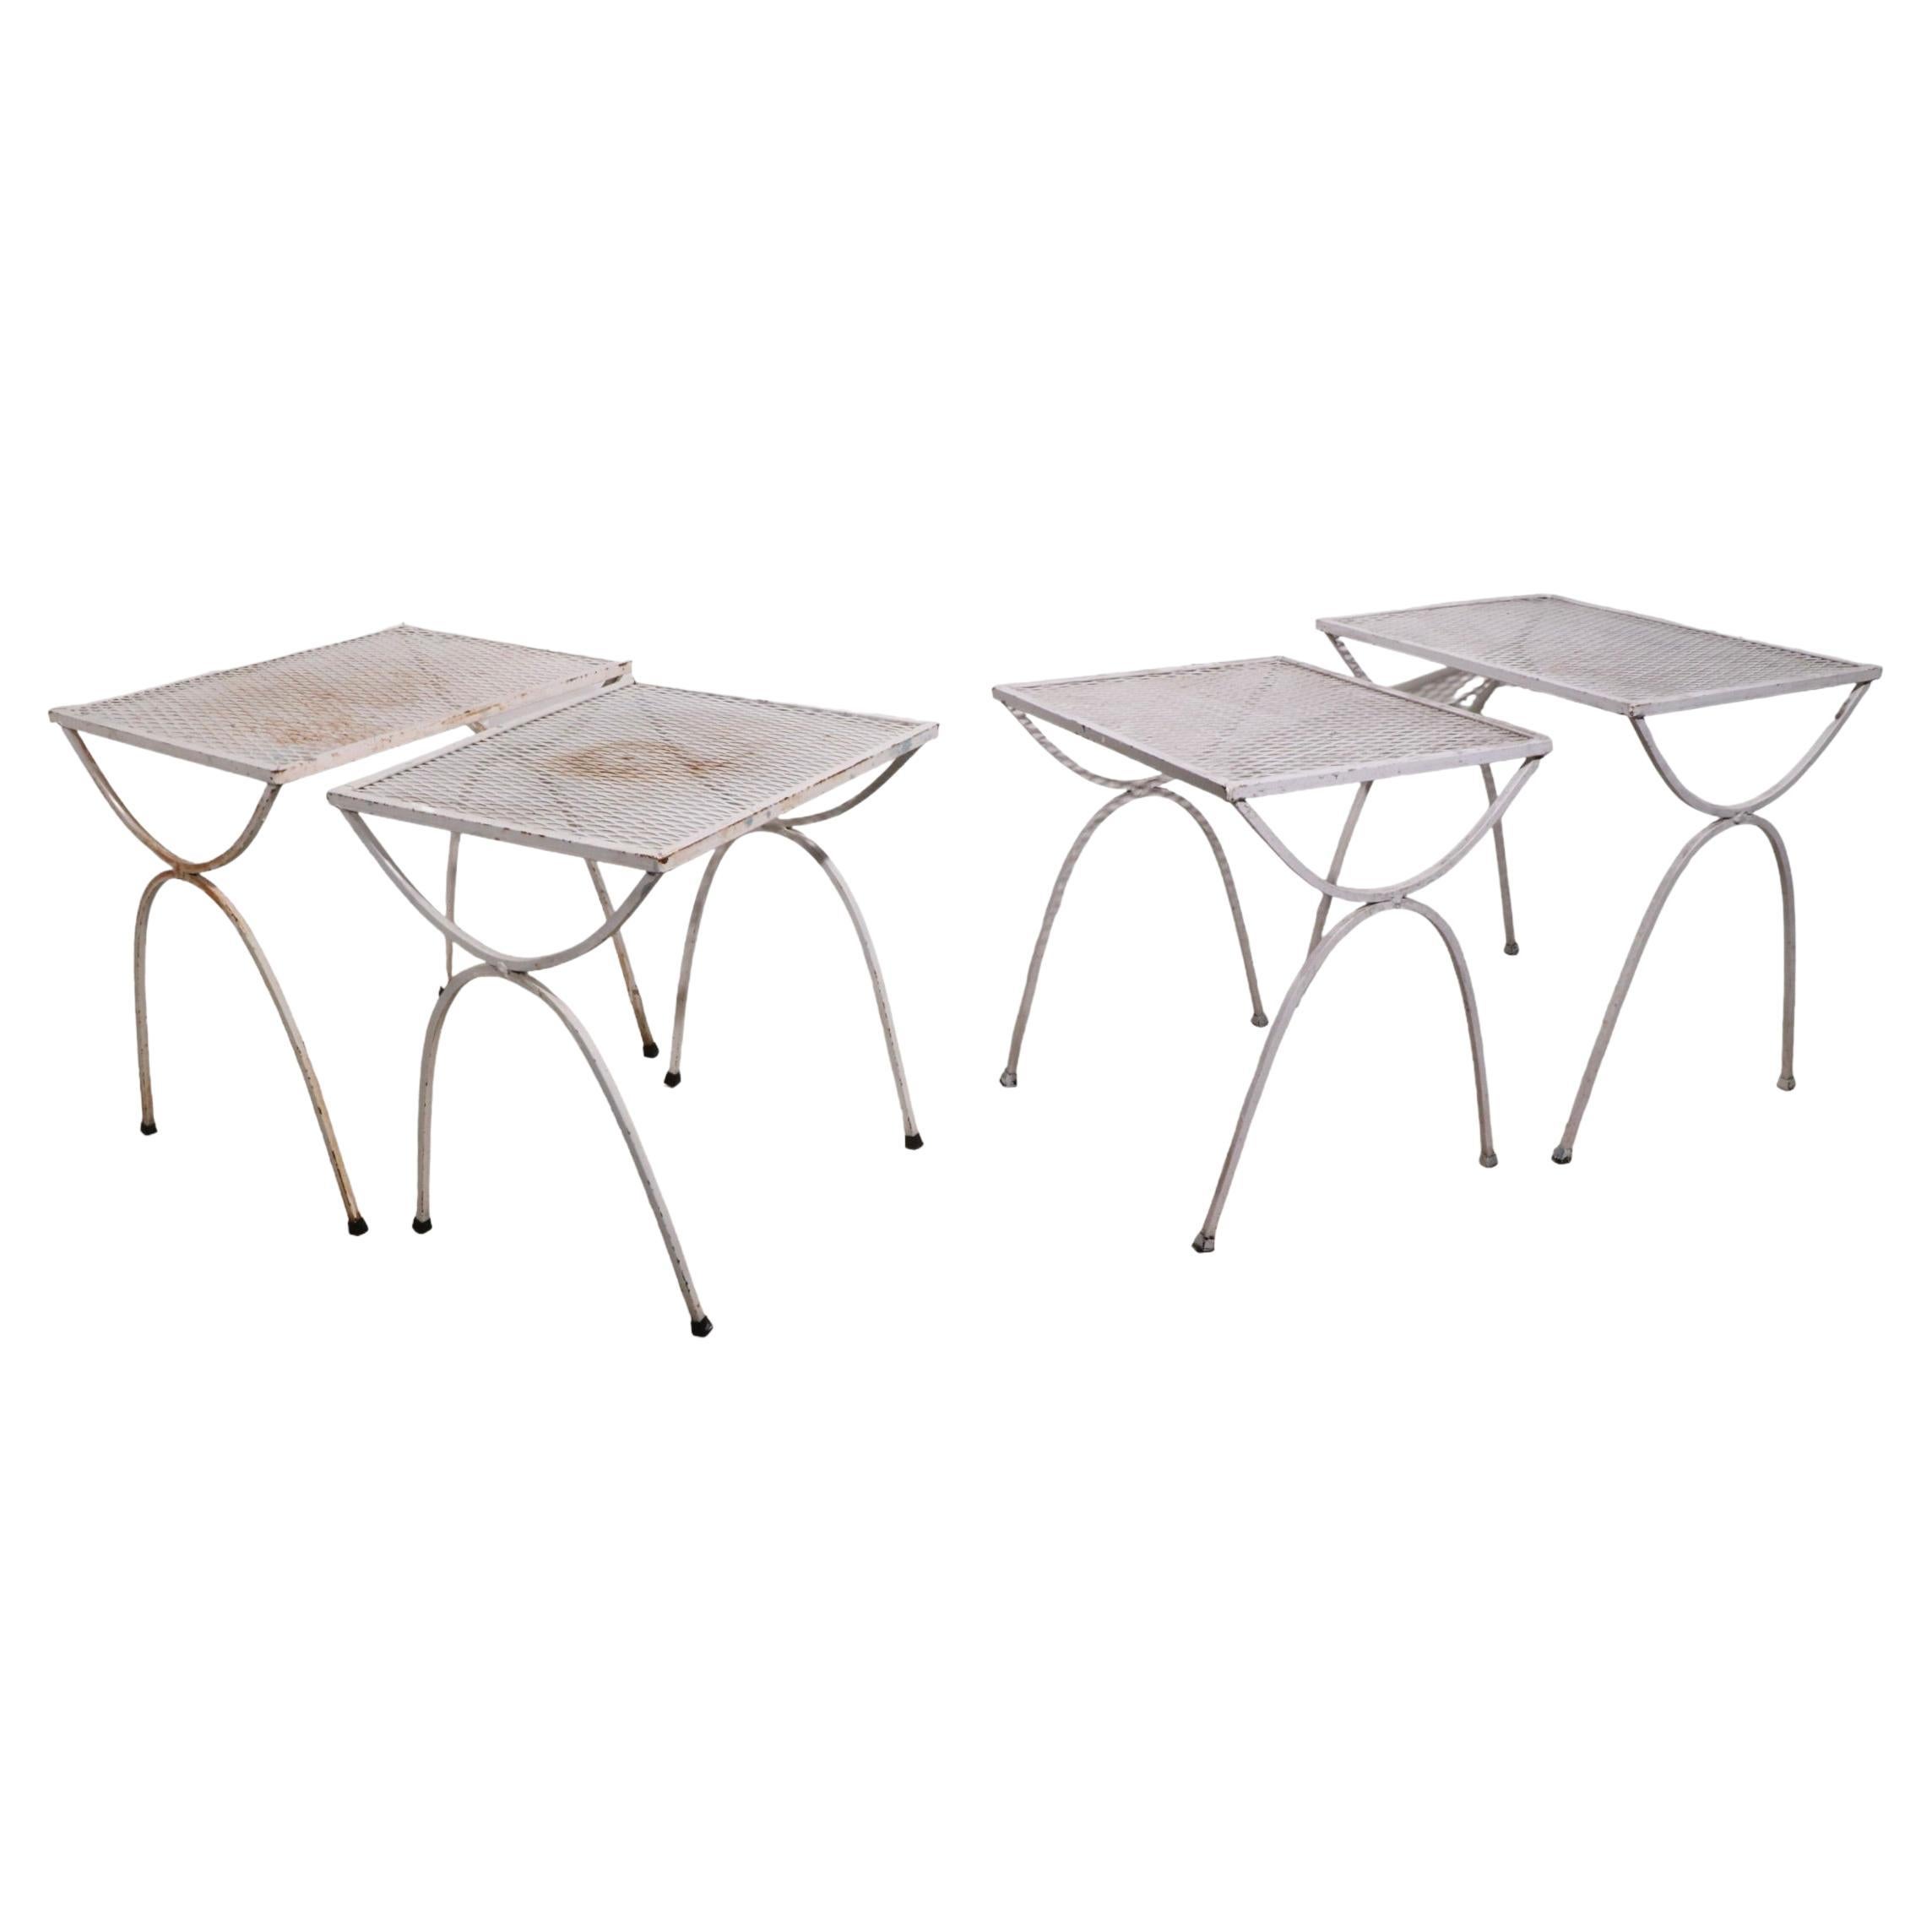 Two Piece Garden Patio Poolside Nesting Tables by Salterini 2 Sets Available